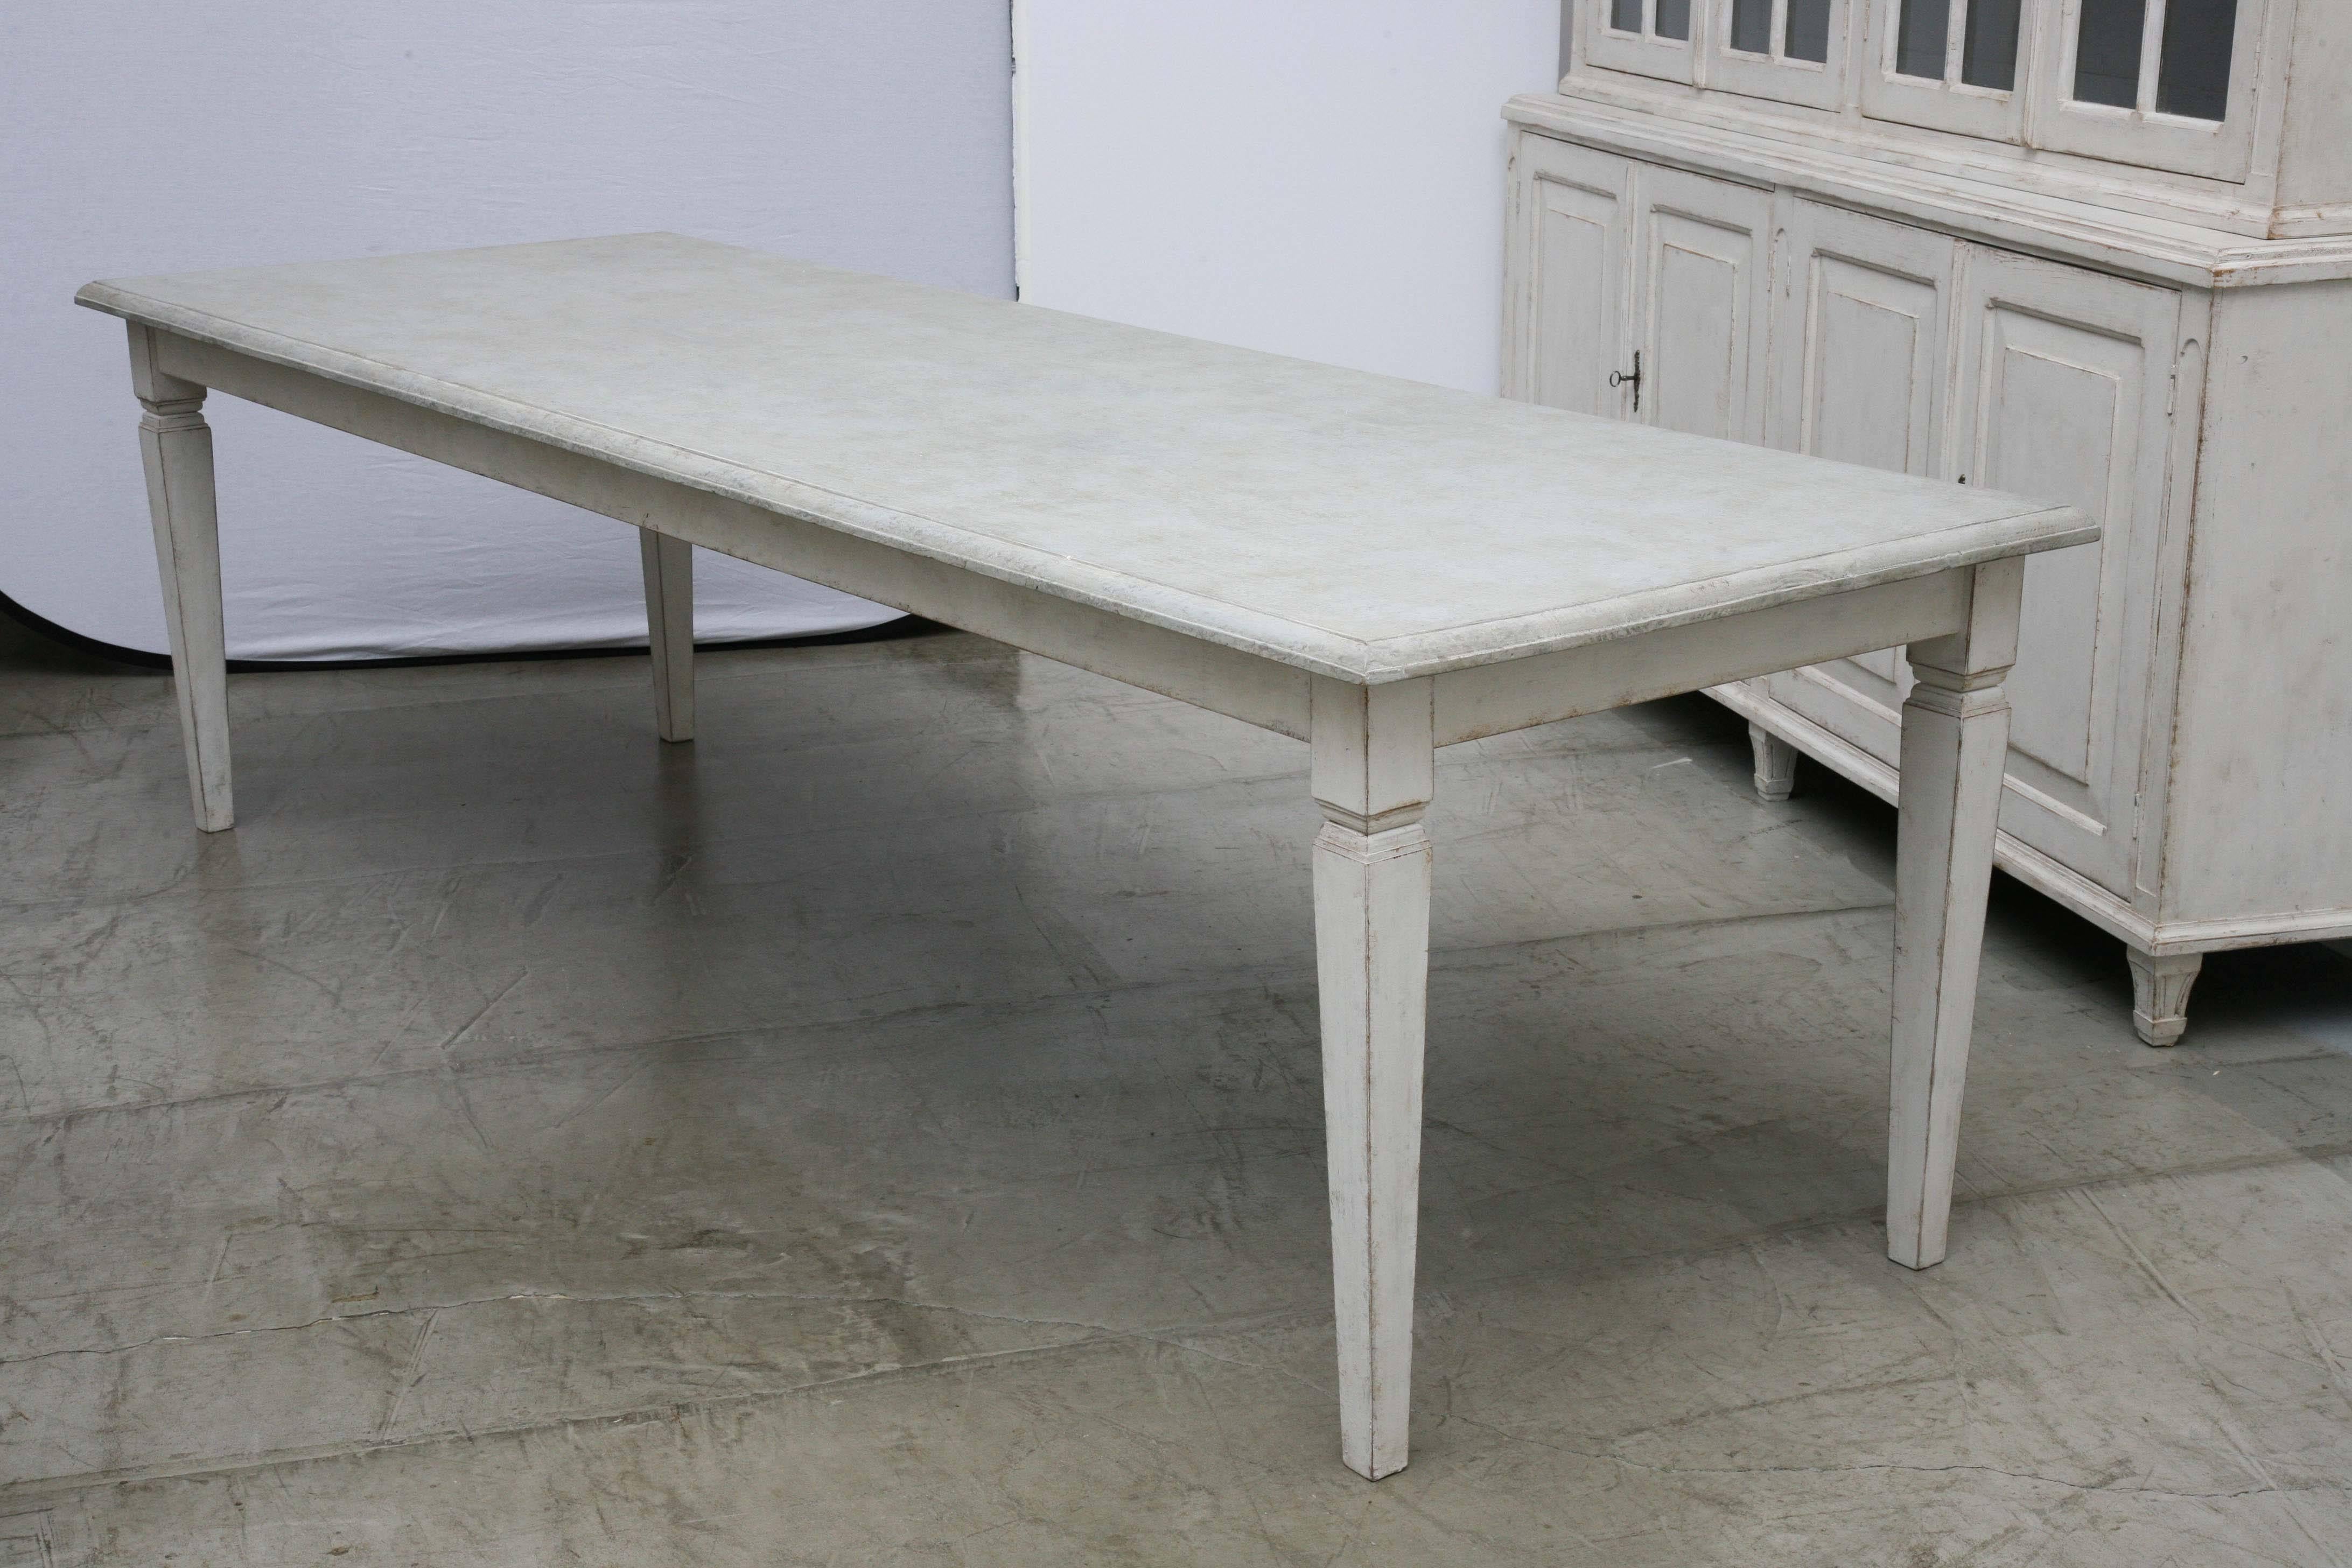 Antique long Swedish Painted dining farm table with a beautiful patina.
The table top in a painted distressed gray color with a carved ogee edge and the bottom in light Gustavian white-tray painted distressed finish,  square tapered simple legs.